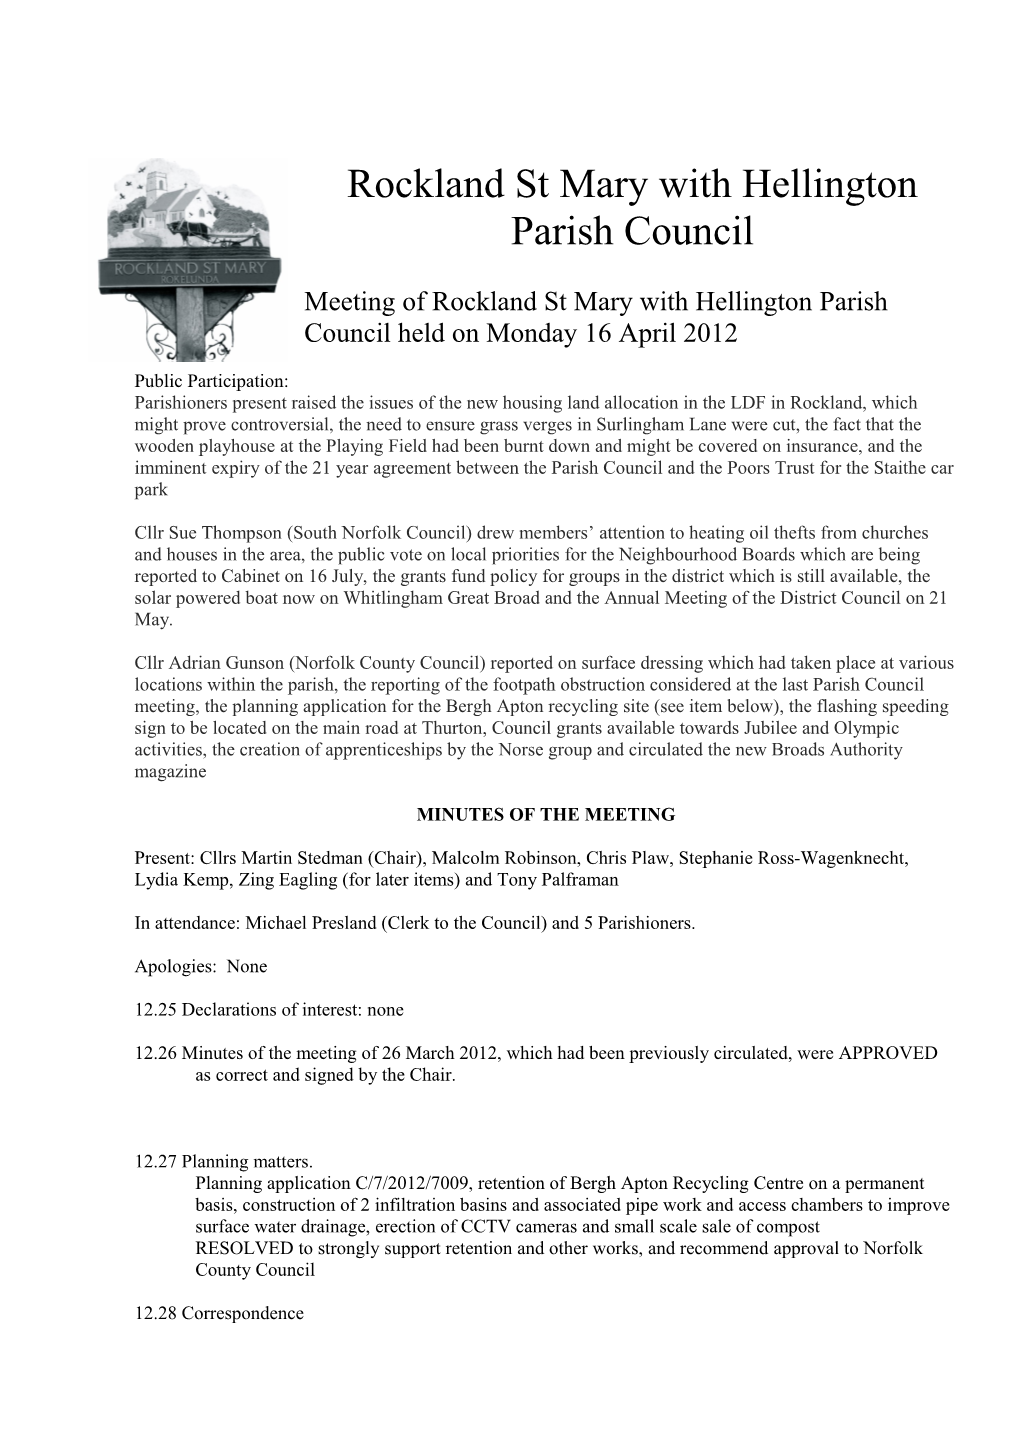 Meeting of Rockland St Mary with Hellington Parish Council Held Onmonday 16 April 2012